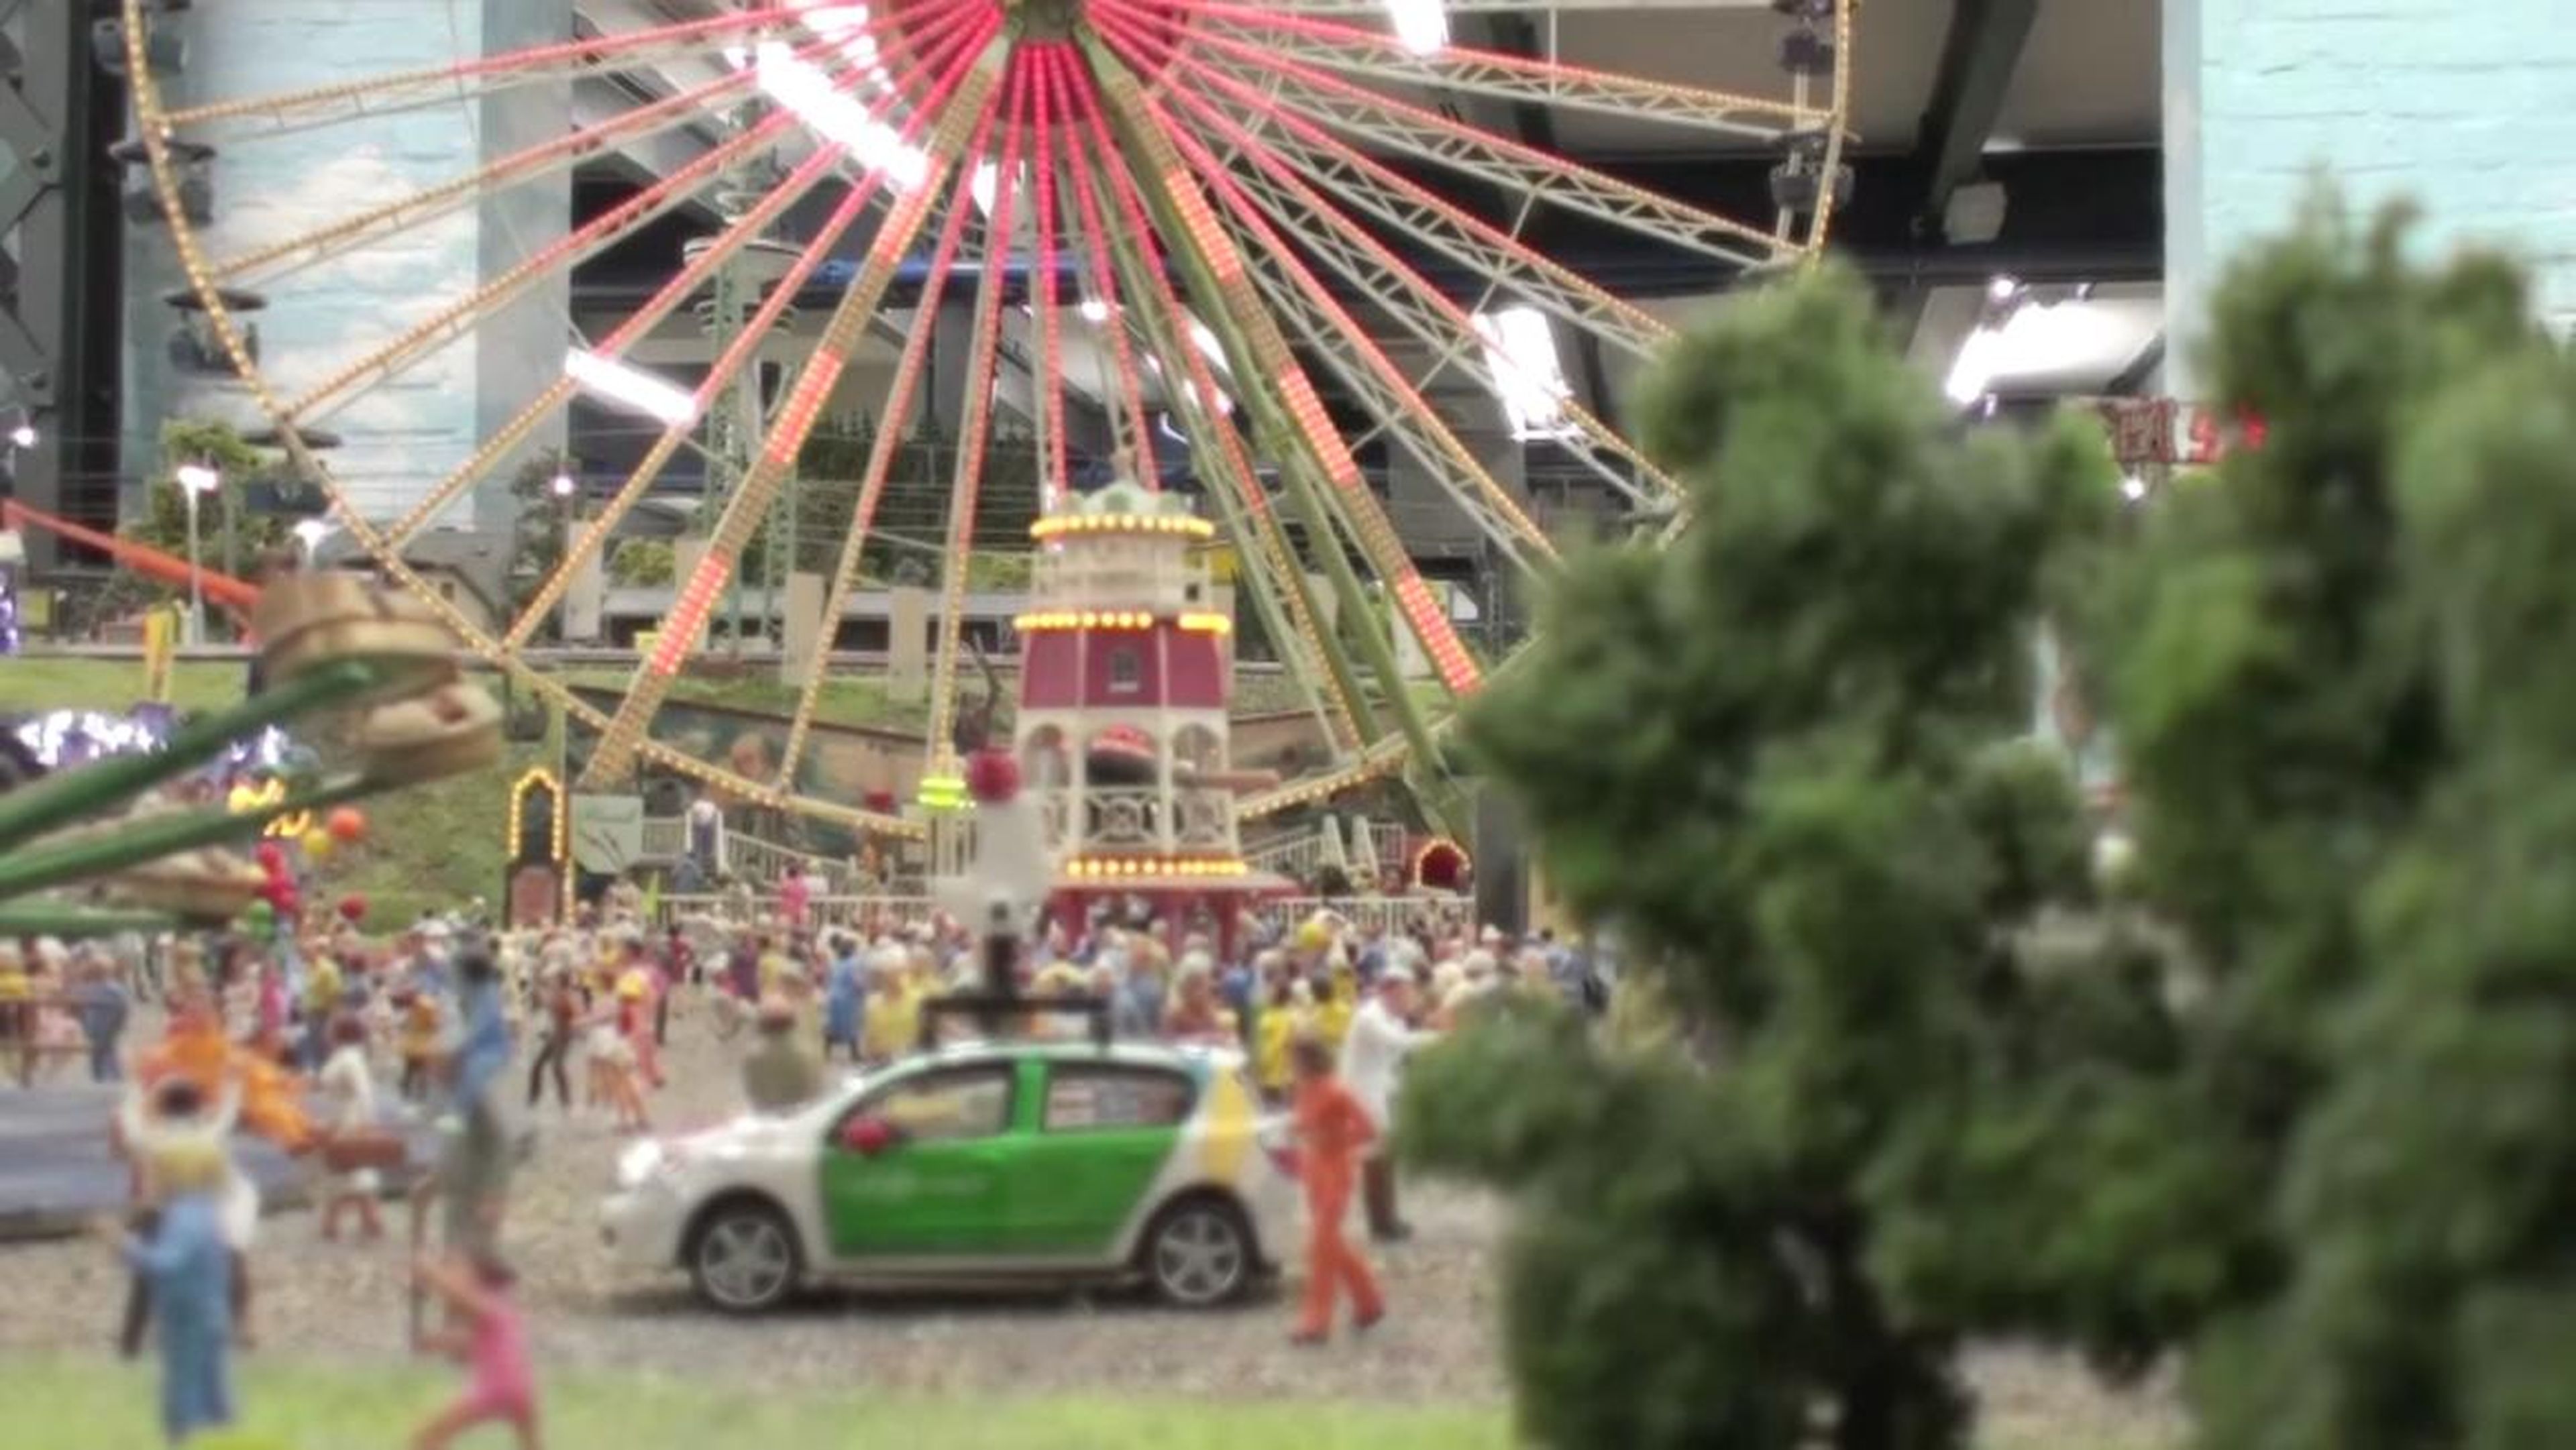 This scene is meant to resemble a county fair in central Germany.